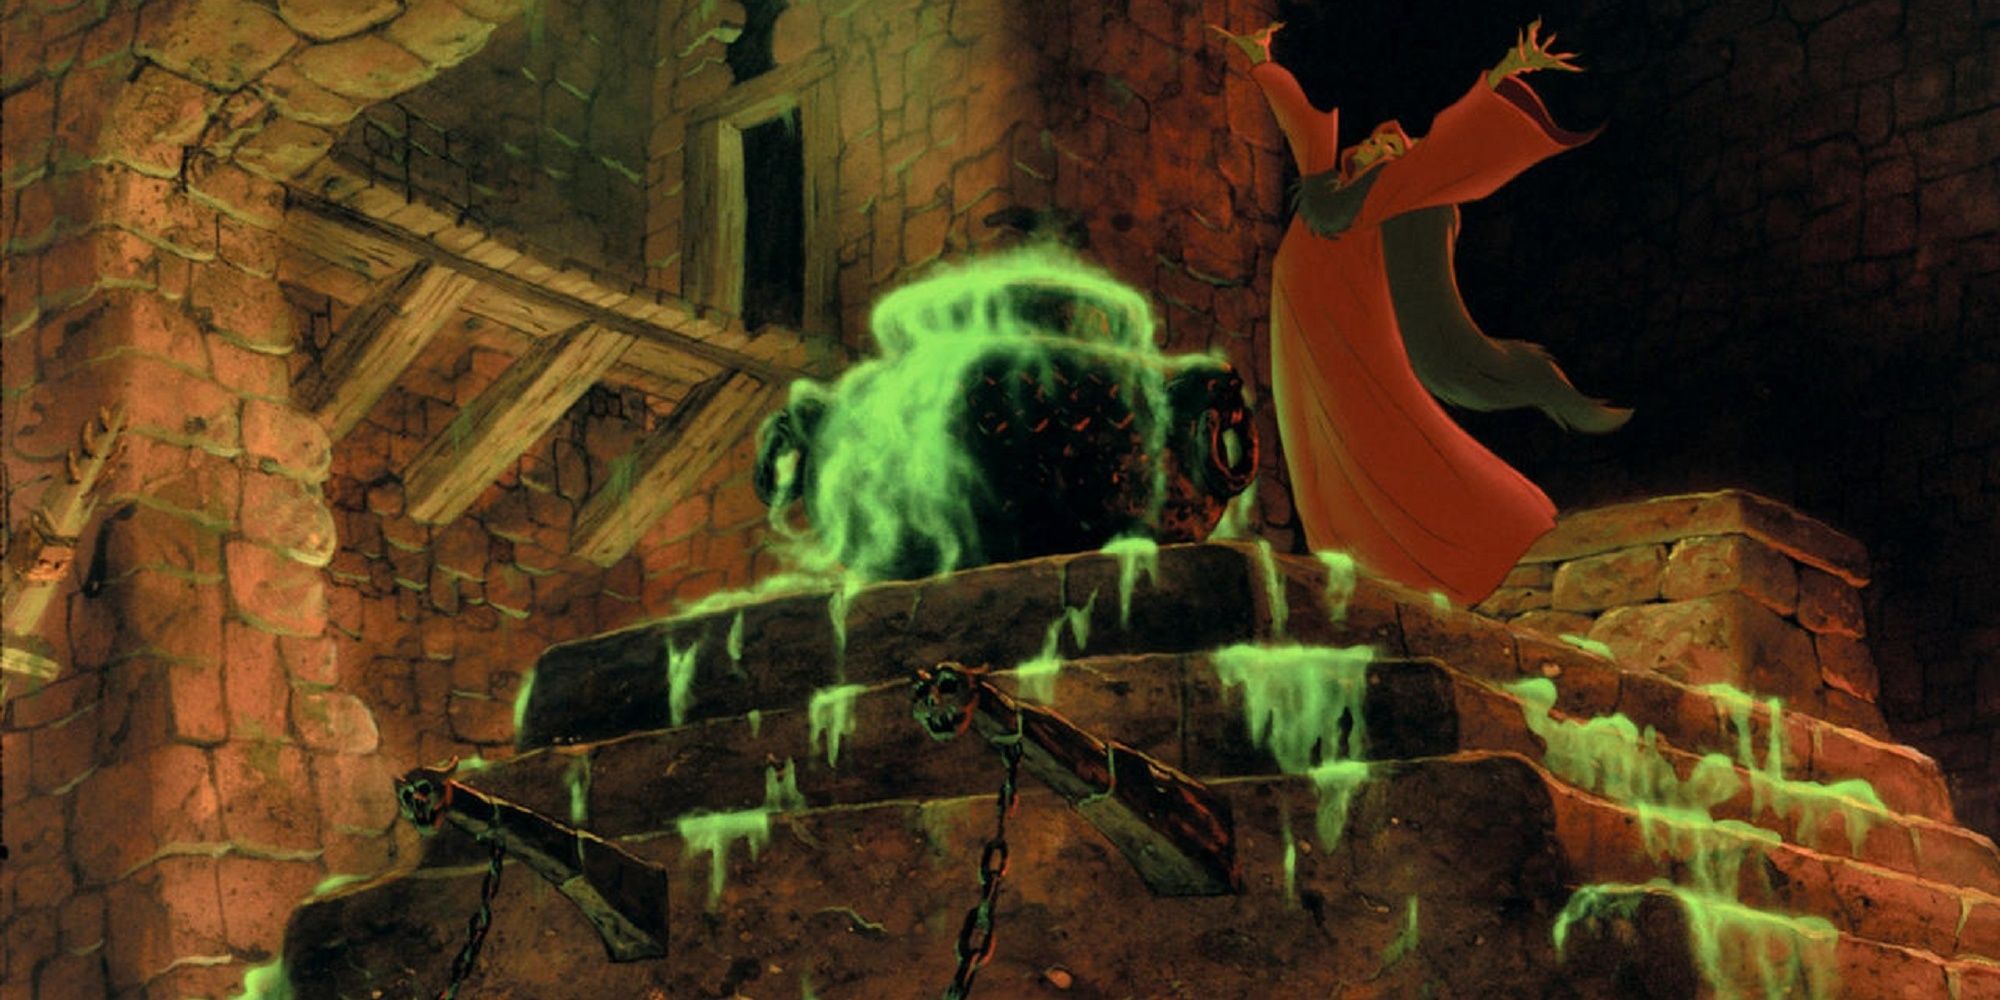 The Horned King with the Black Cauldron on stone steps.